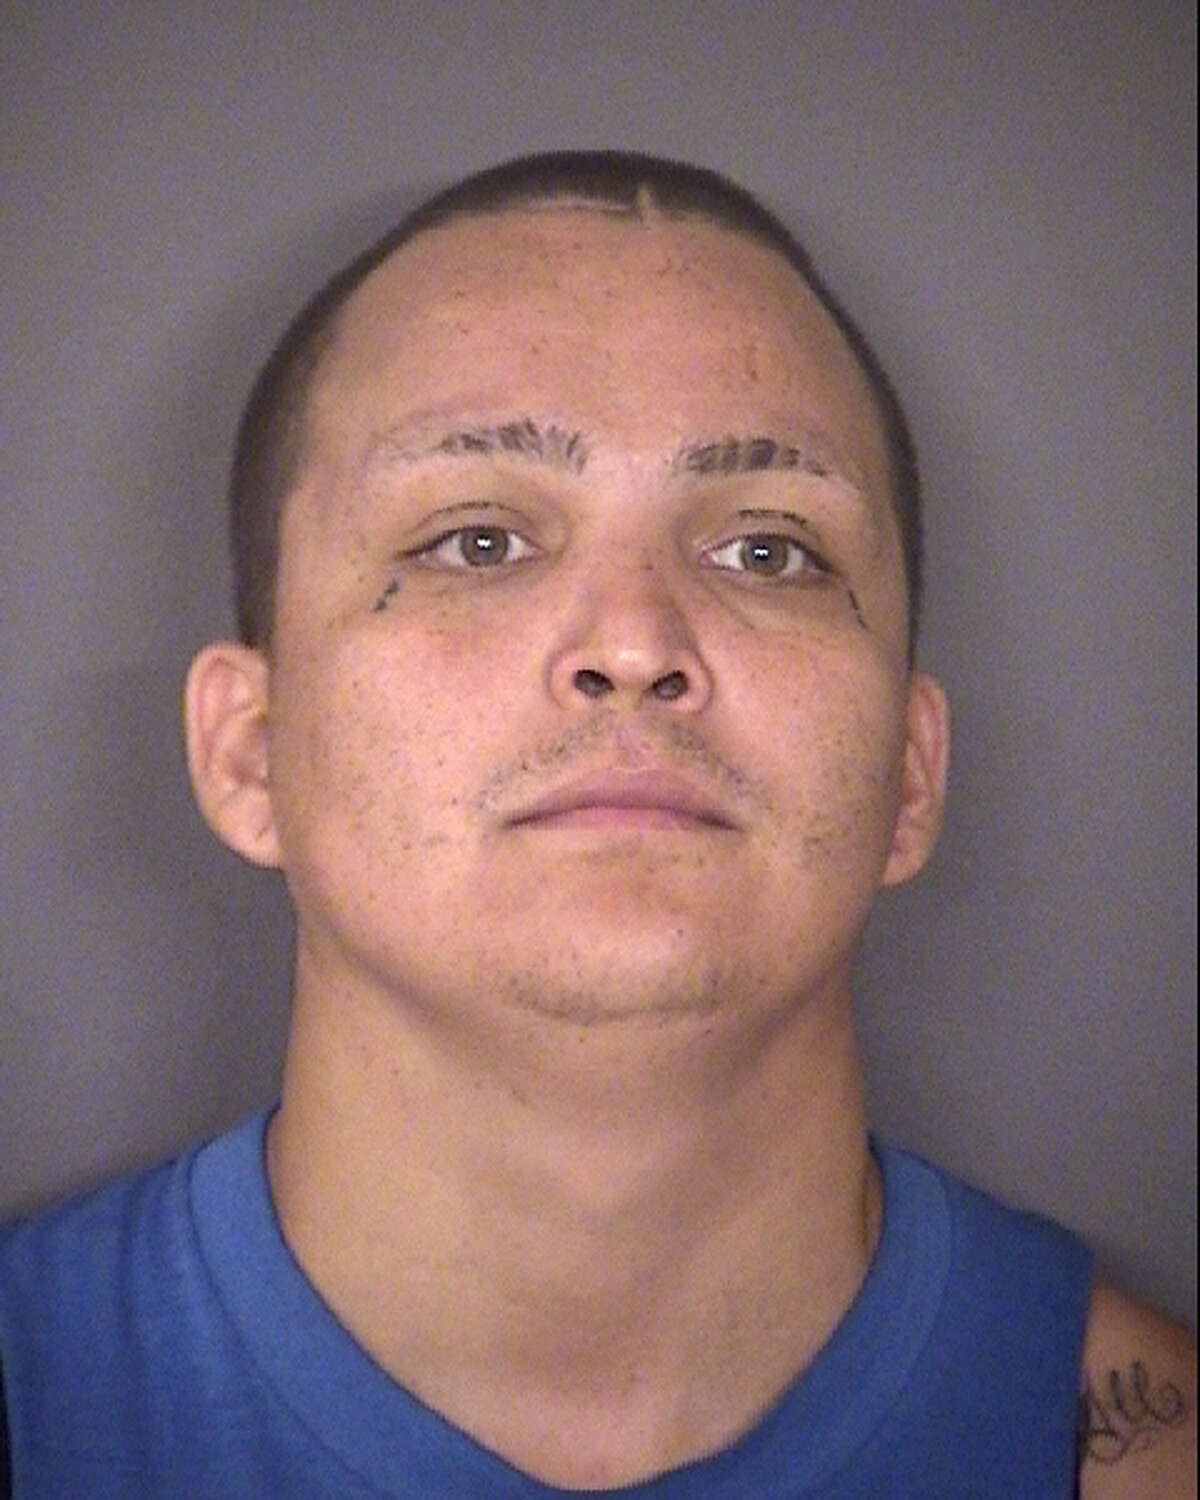 Joshua Rodriguez was charged with aggravated robbery.